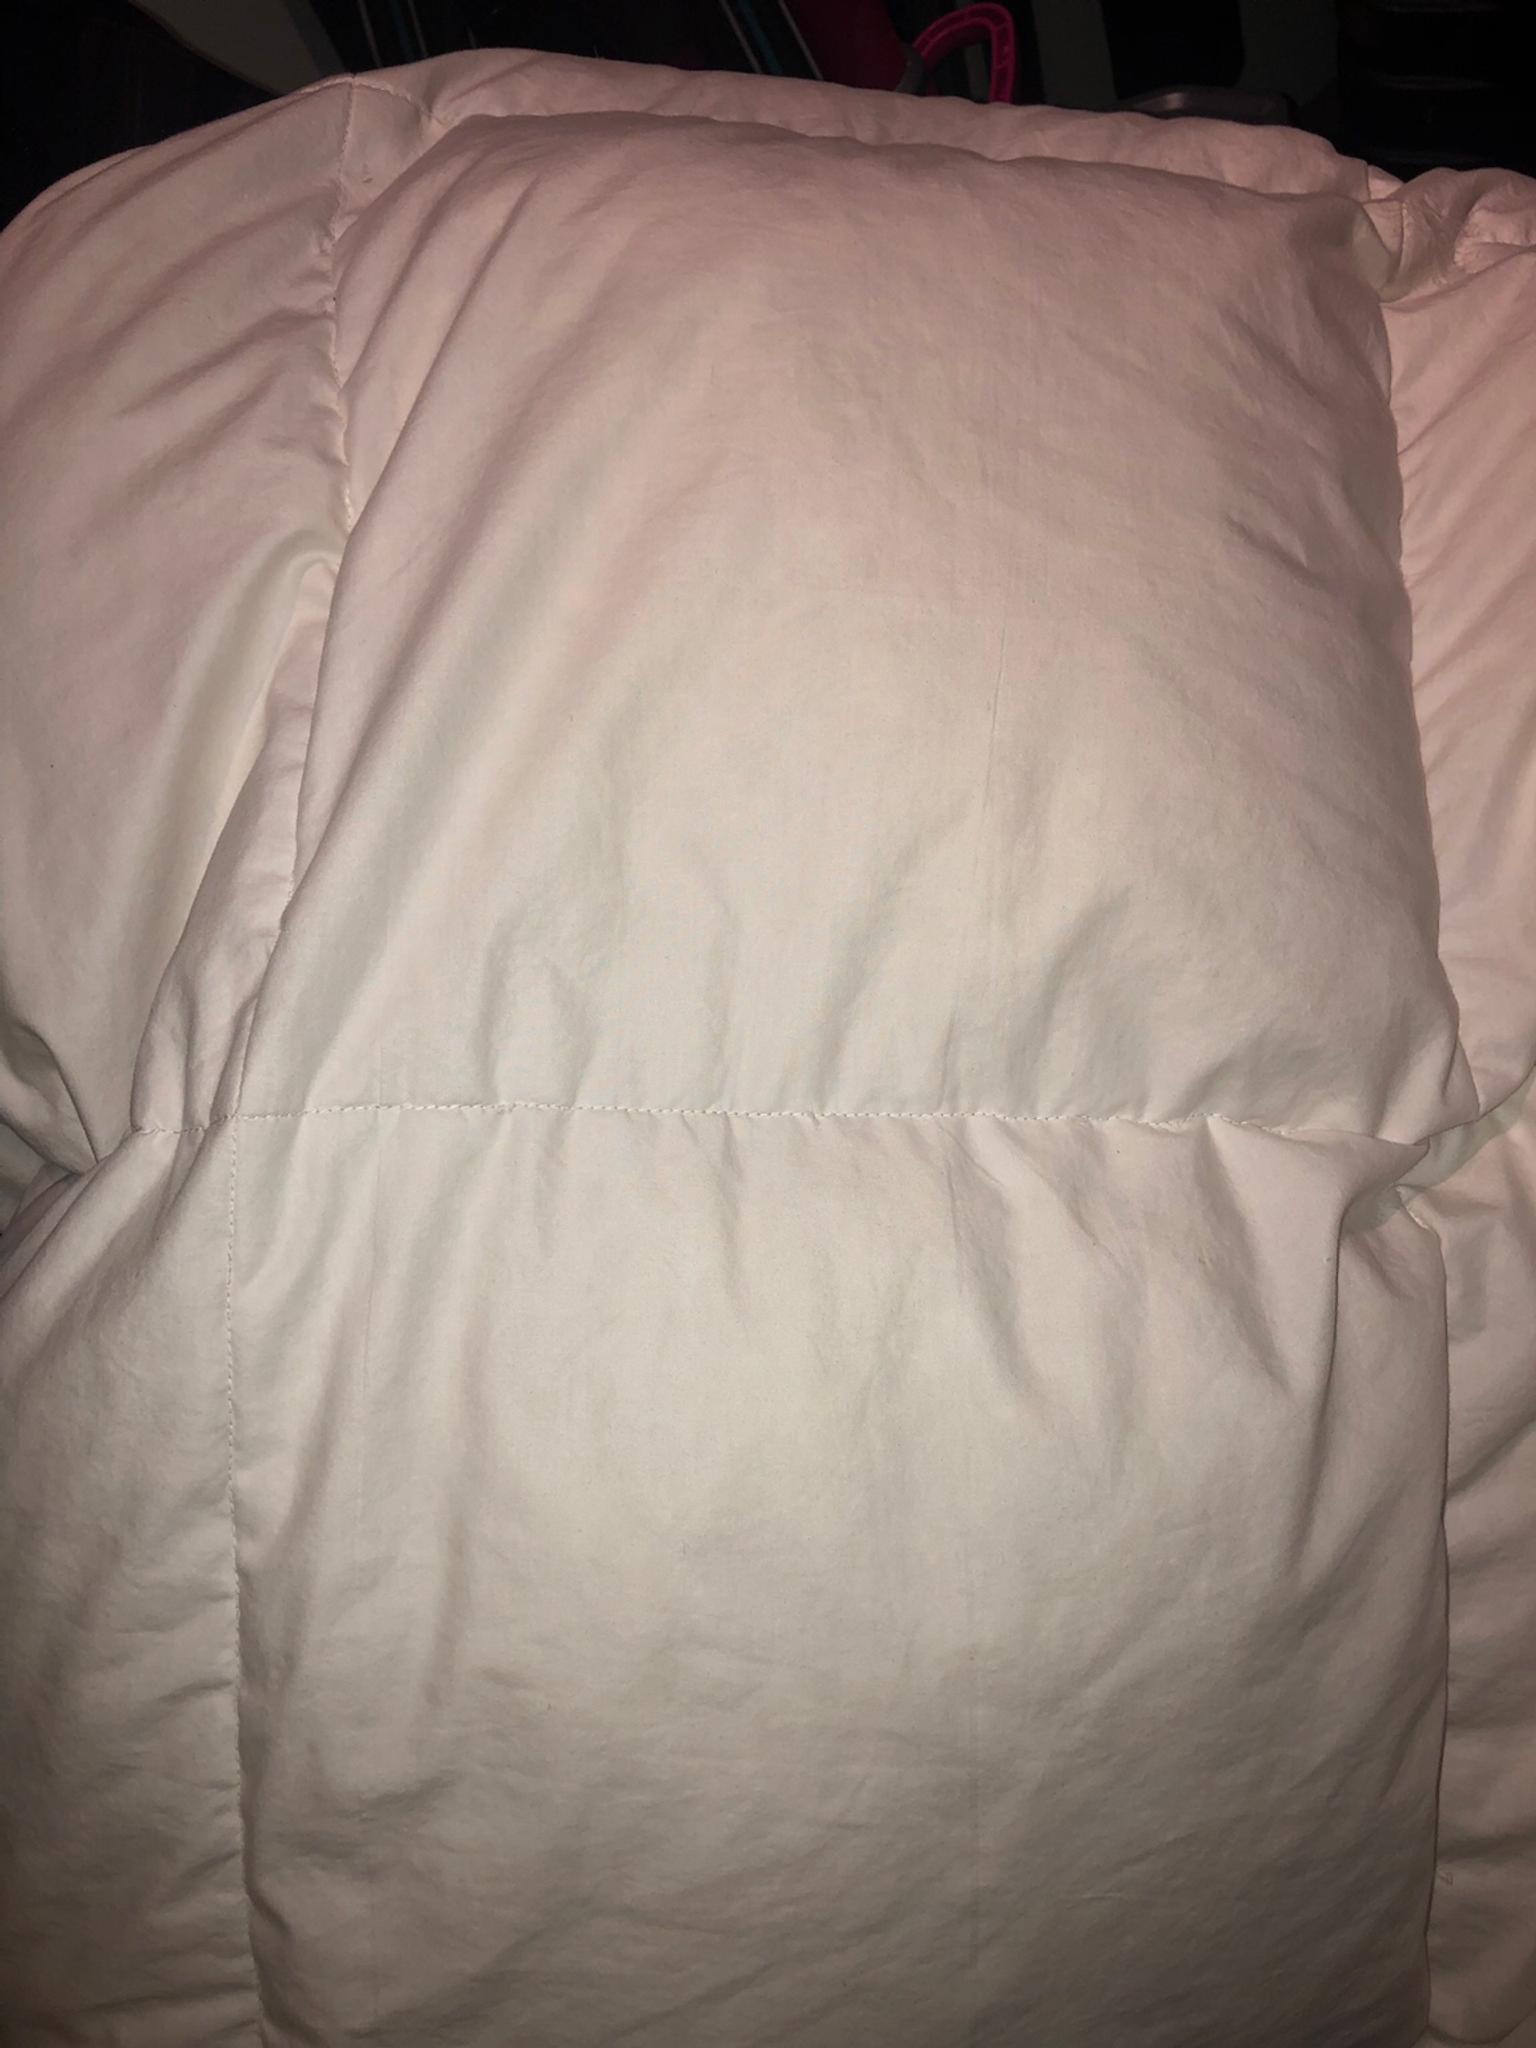 John Lewis Duck Feather Duvet And Pillows X 2 In N1 London Fur